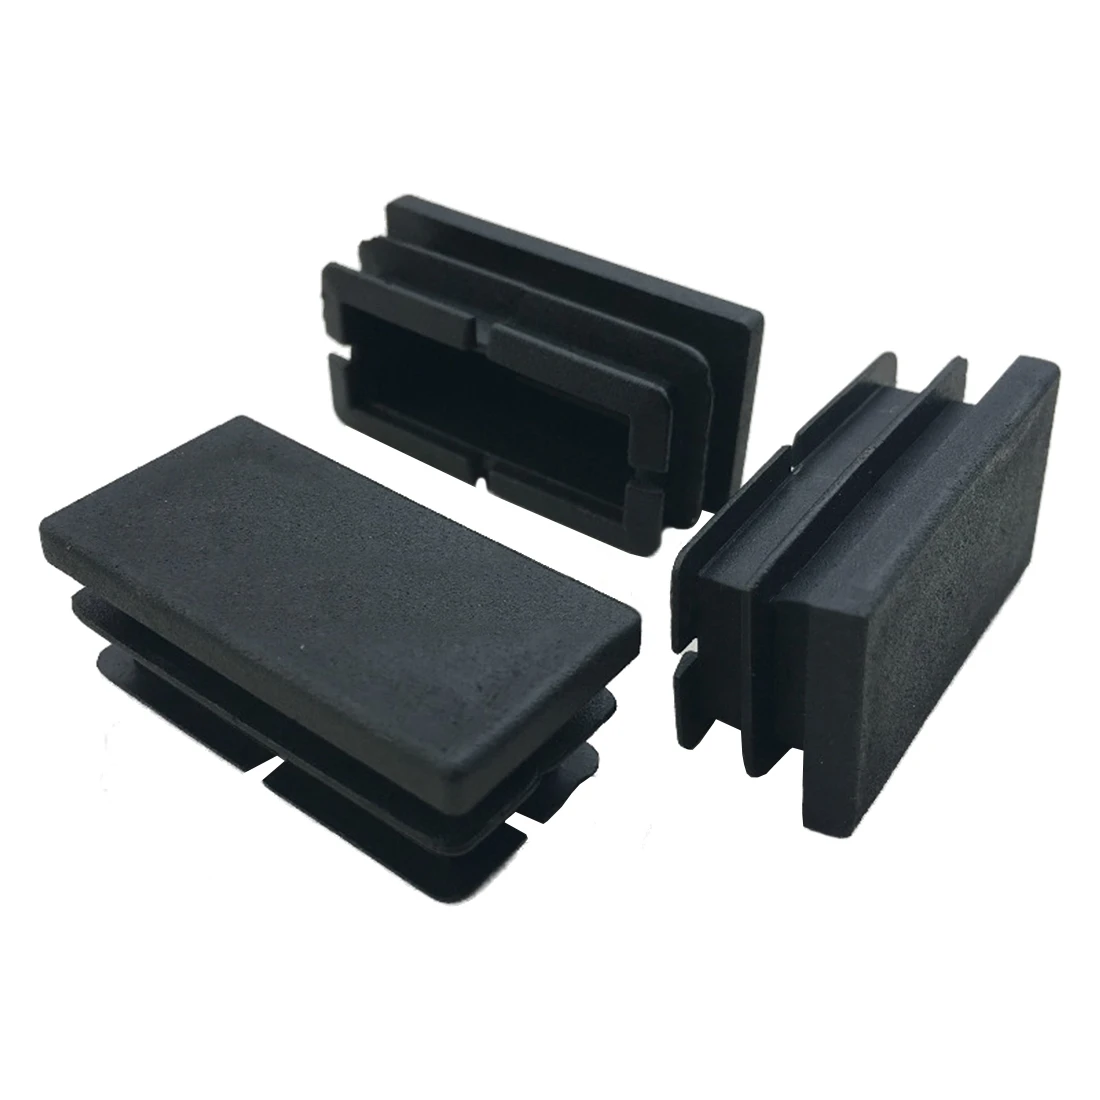 Promotion! 8 Pcs Black Plastic Rectangular Blanking End Caps Inserts 20mm x 40mm Plastic Ribbed for assembly and secure fitting